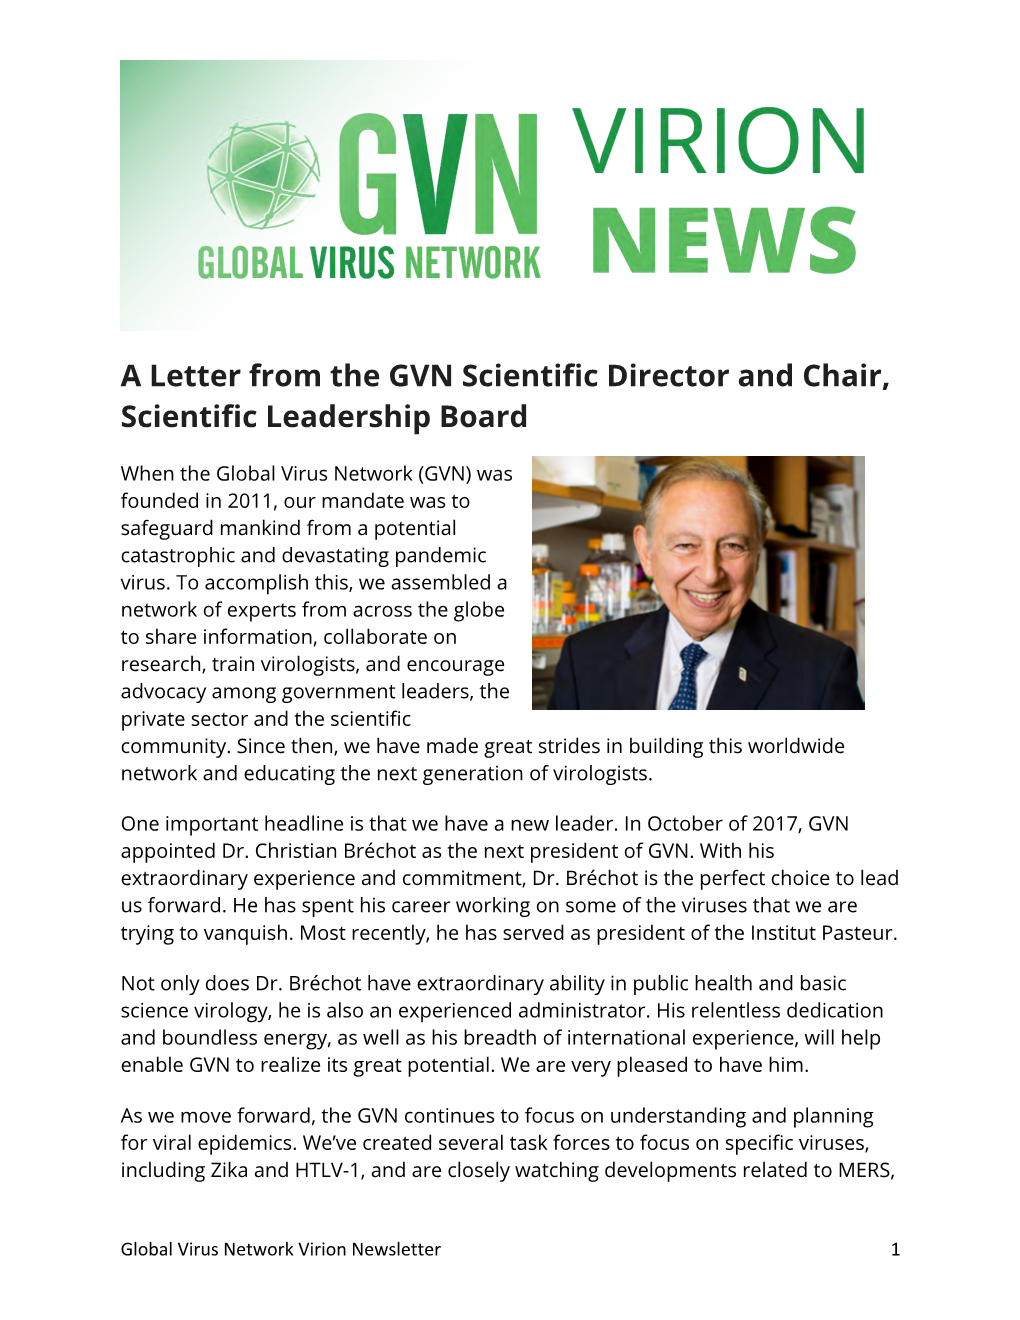 A Letter from the GVN Scientific Director and Chair, Scientific Leadership Board